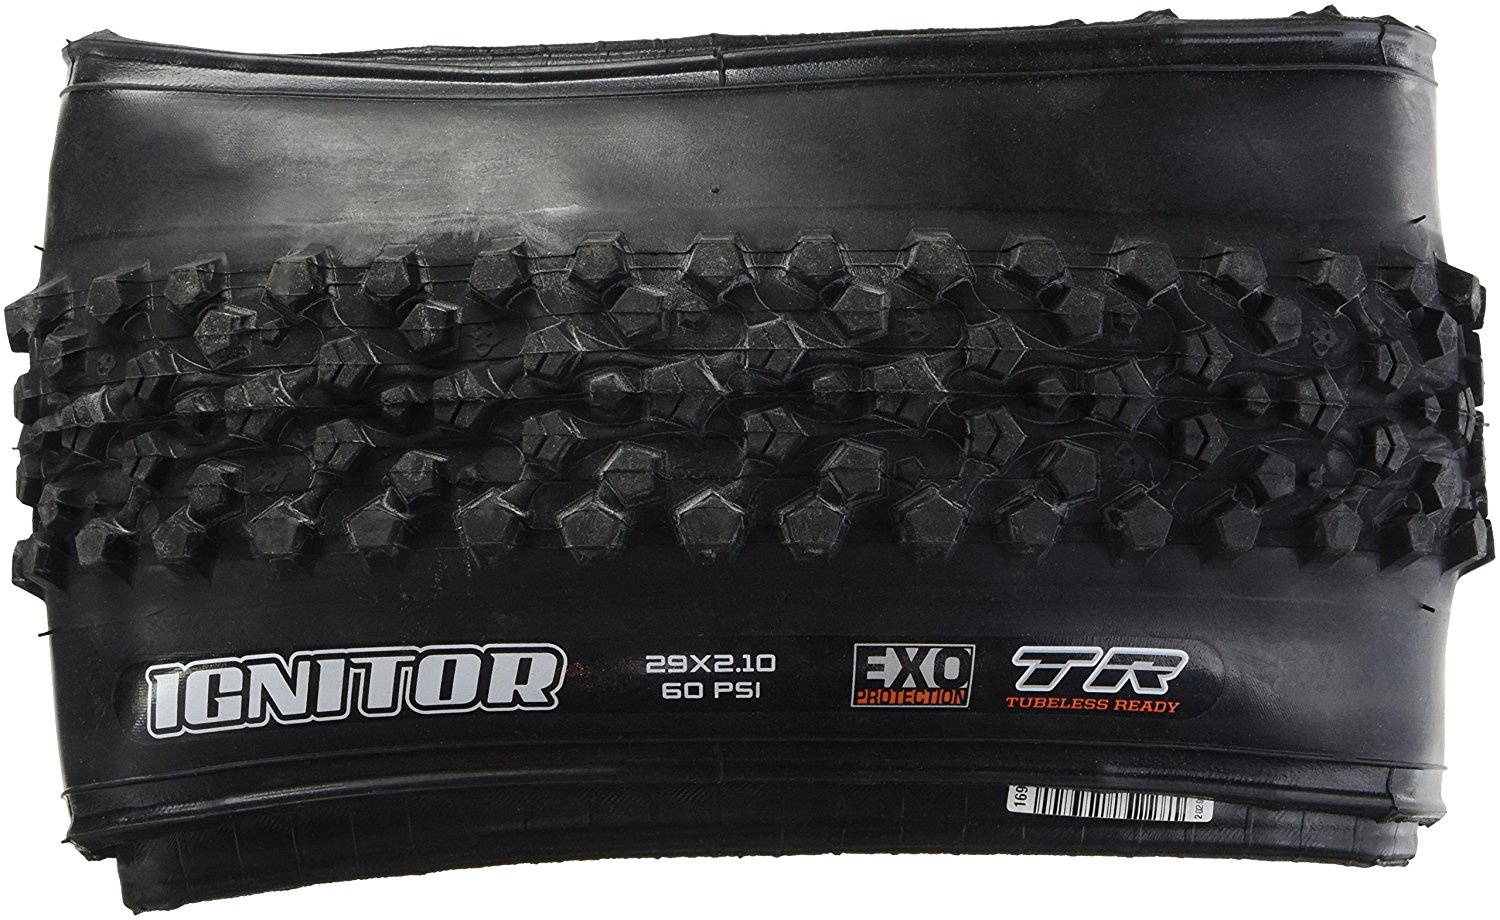 cubierta Maxxis ignitor tubeless